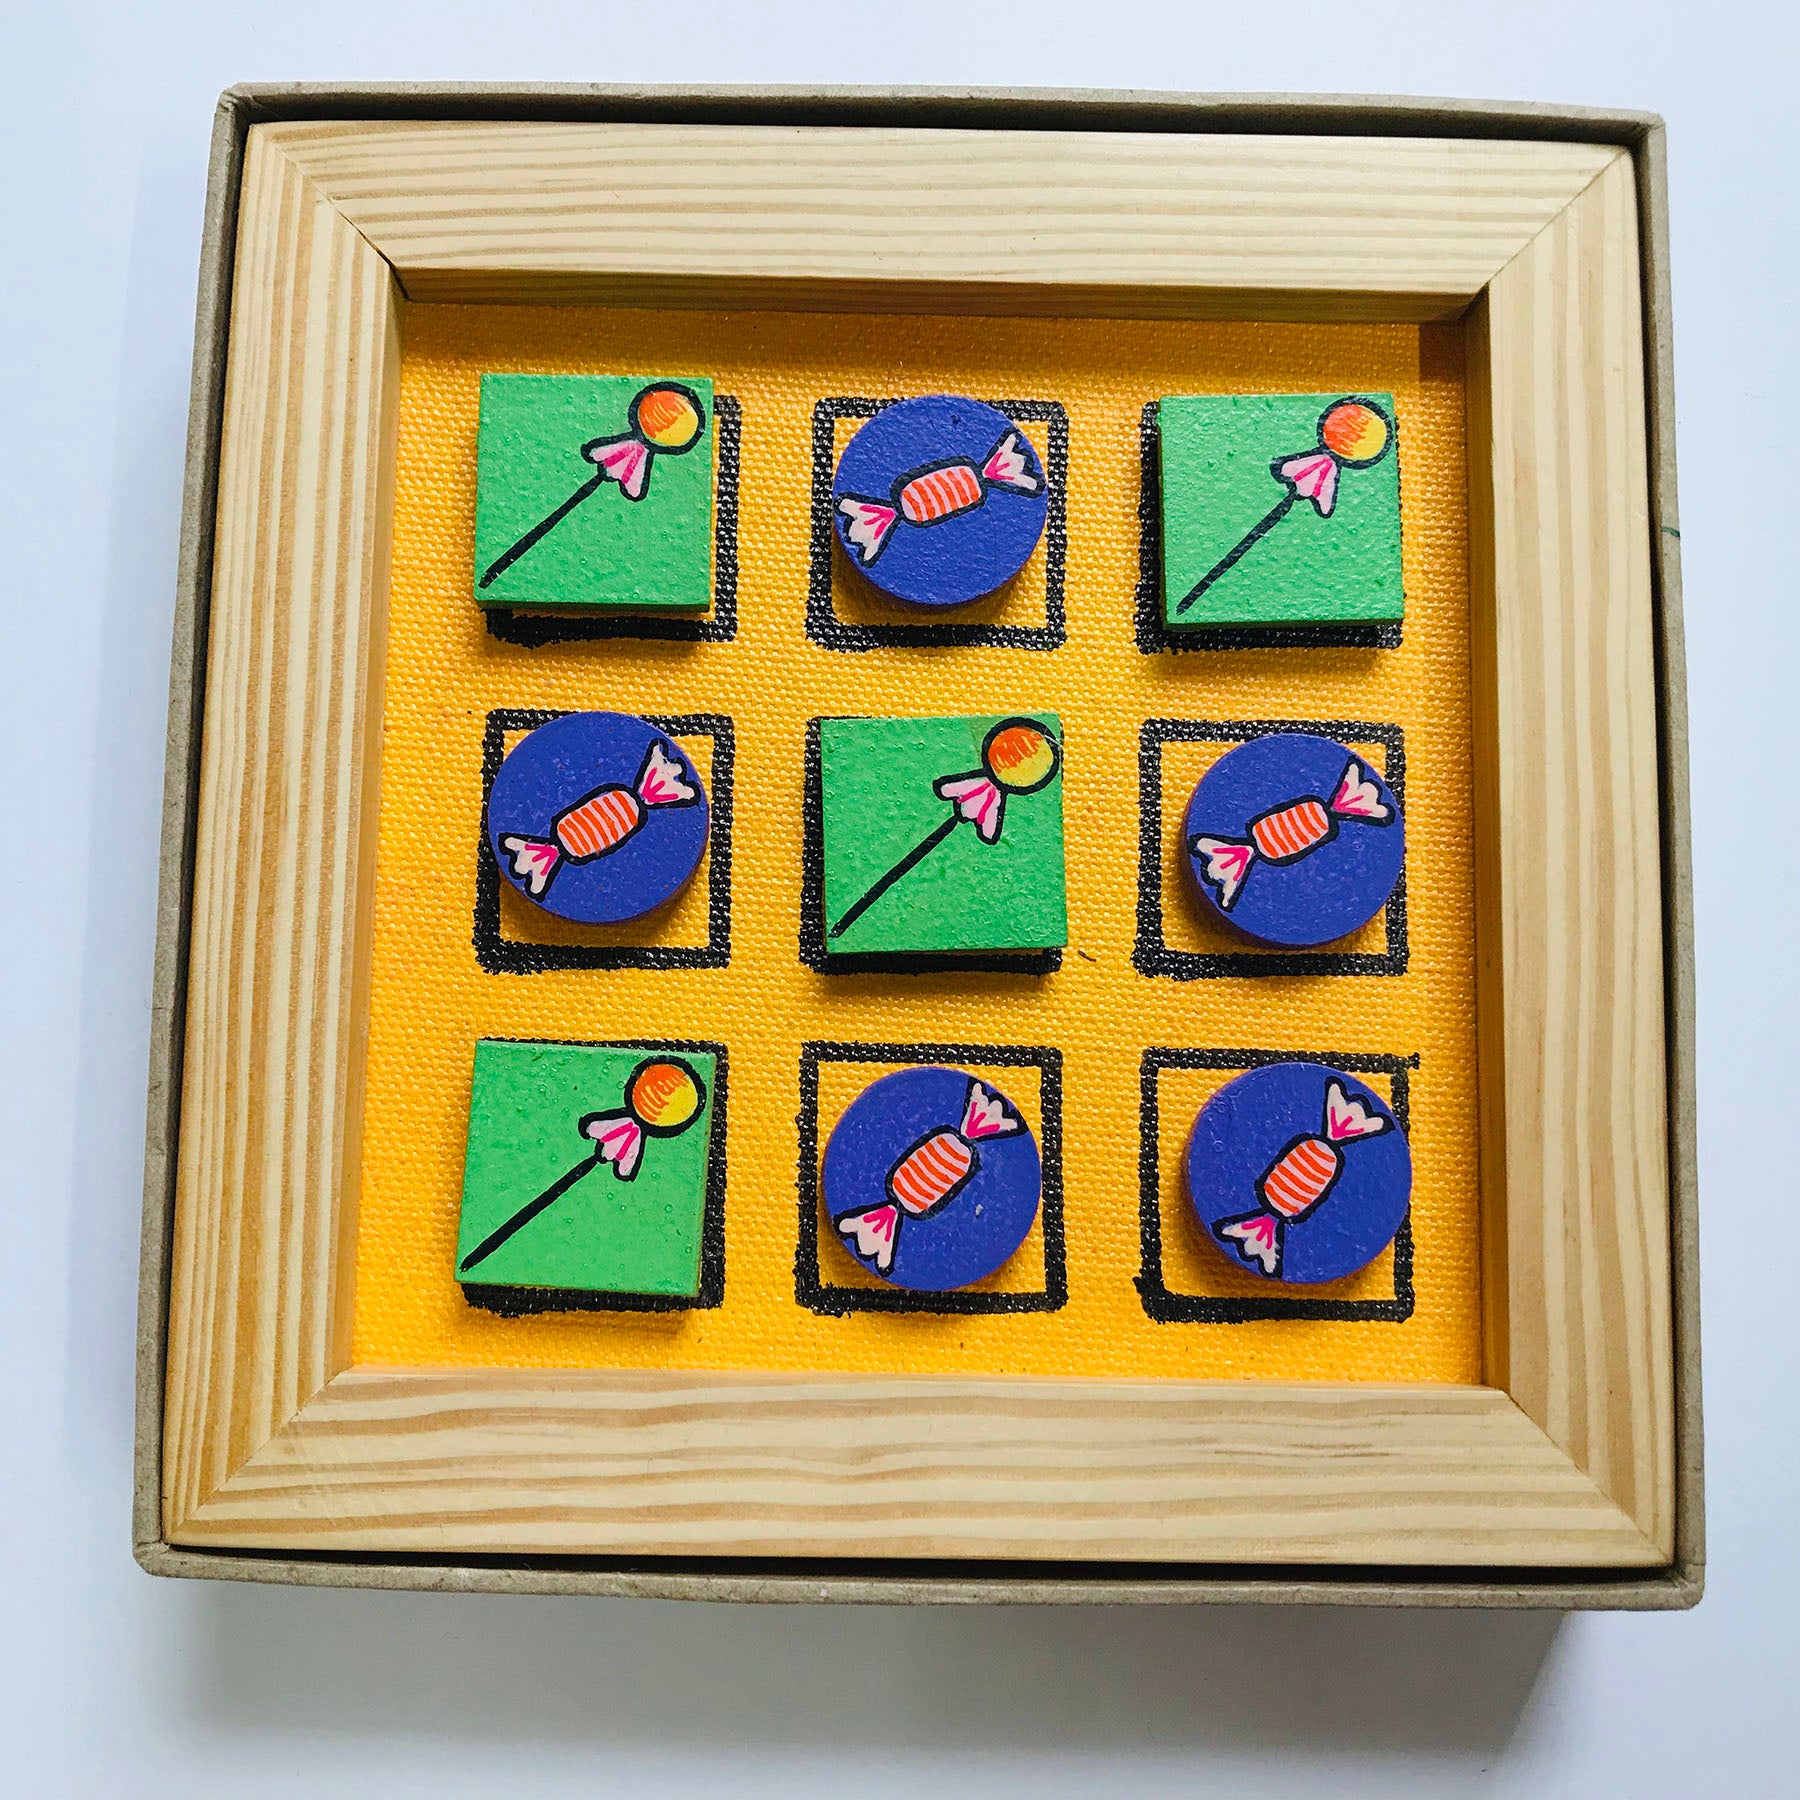 Handpainted Noughts and Crosses (Tic Tac Toe) board game